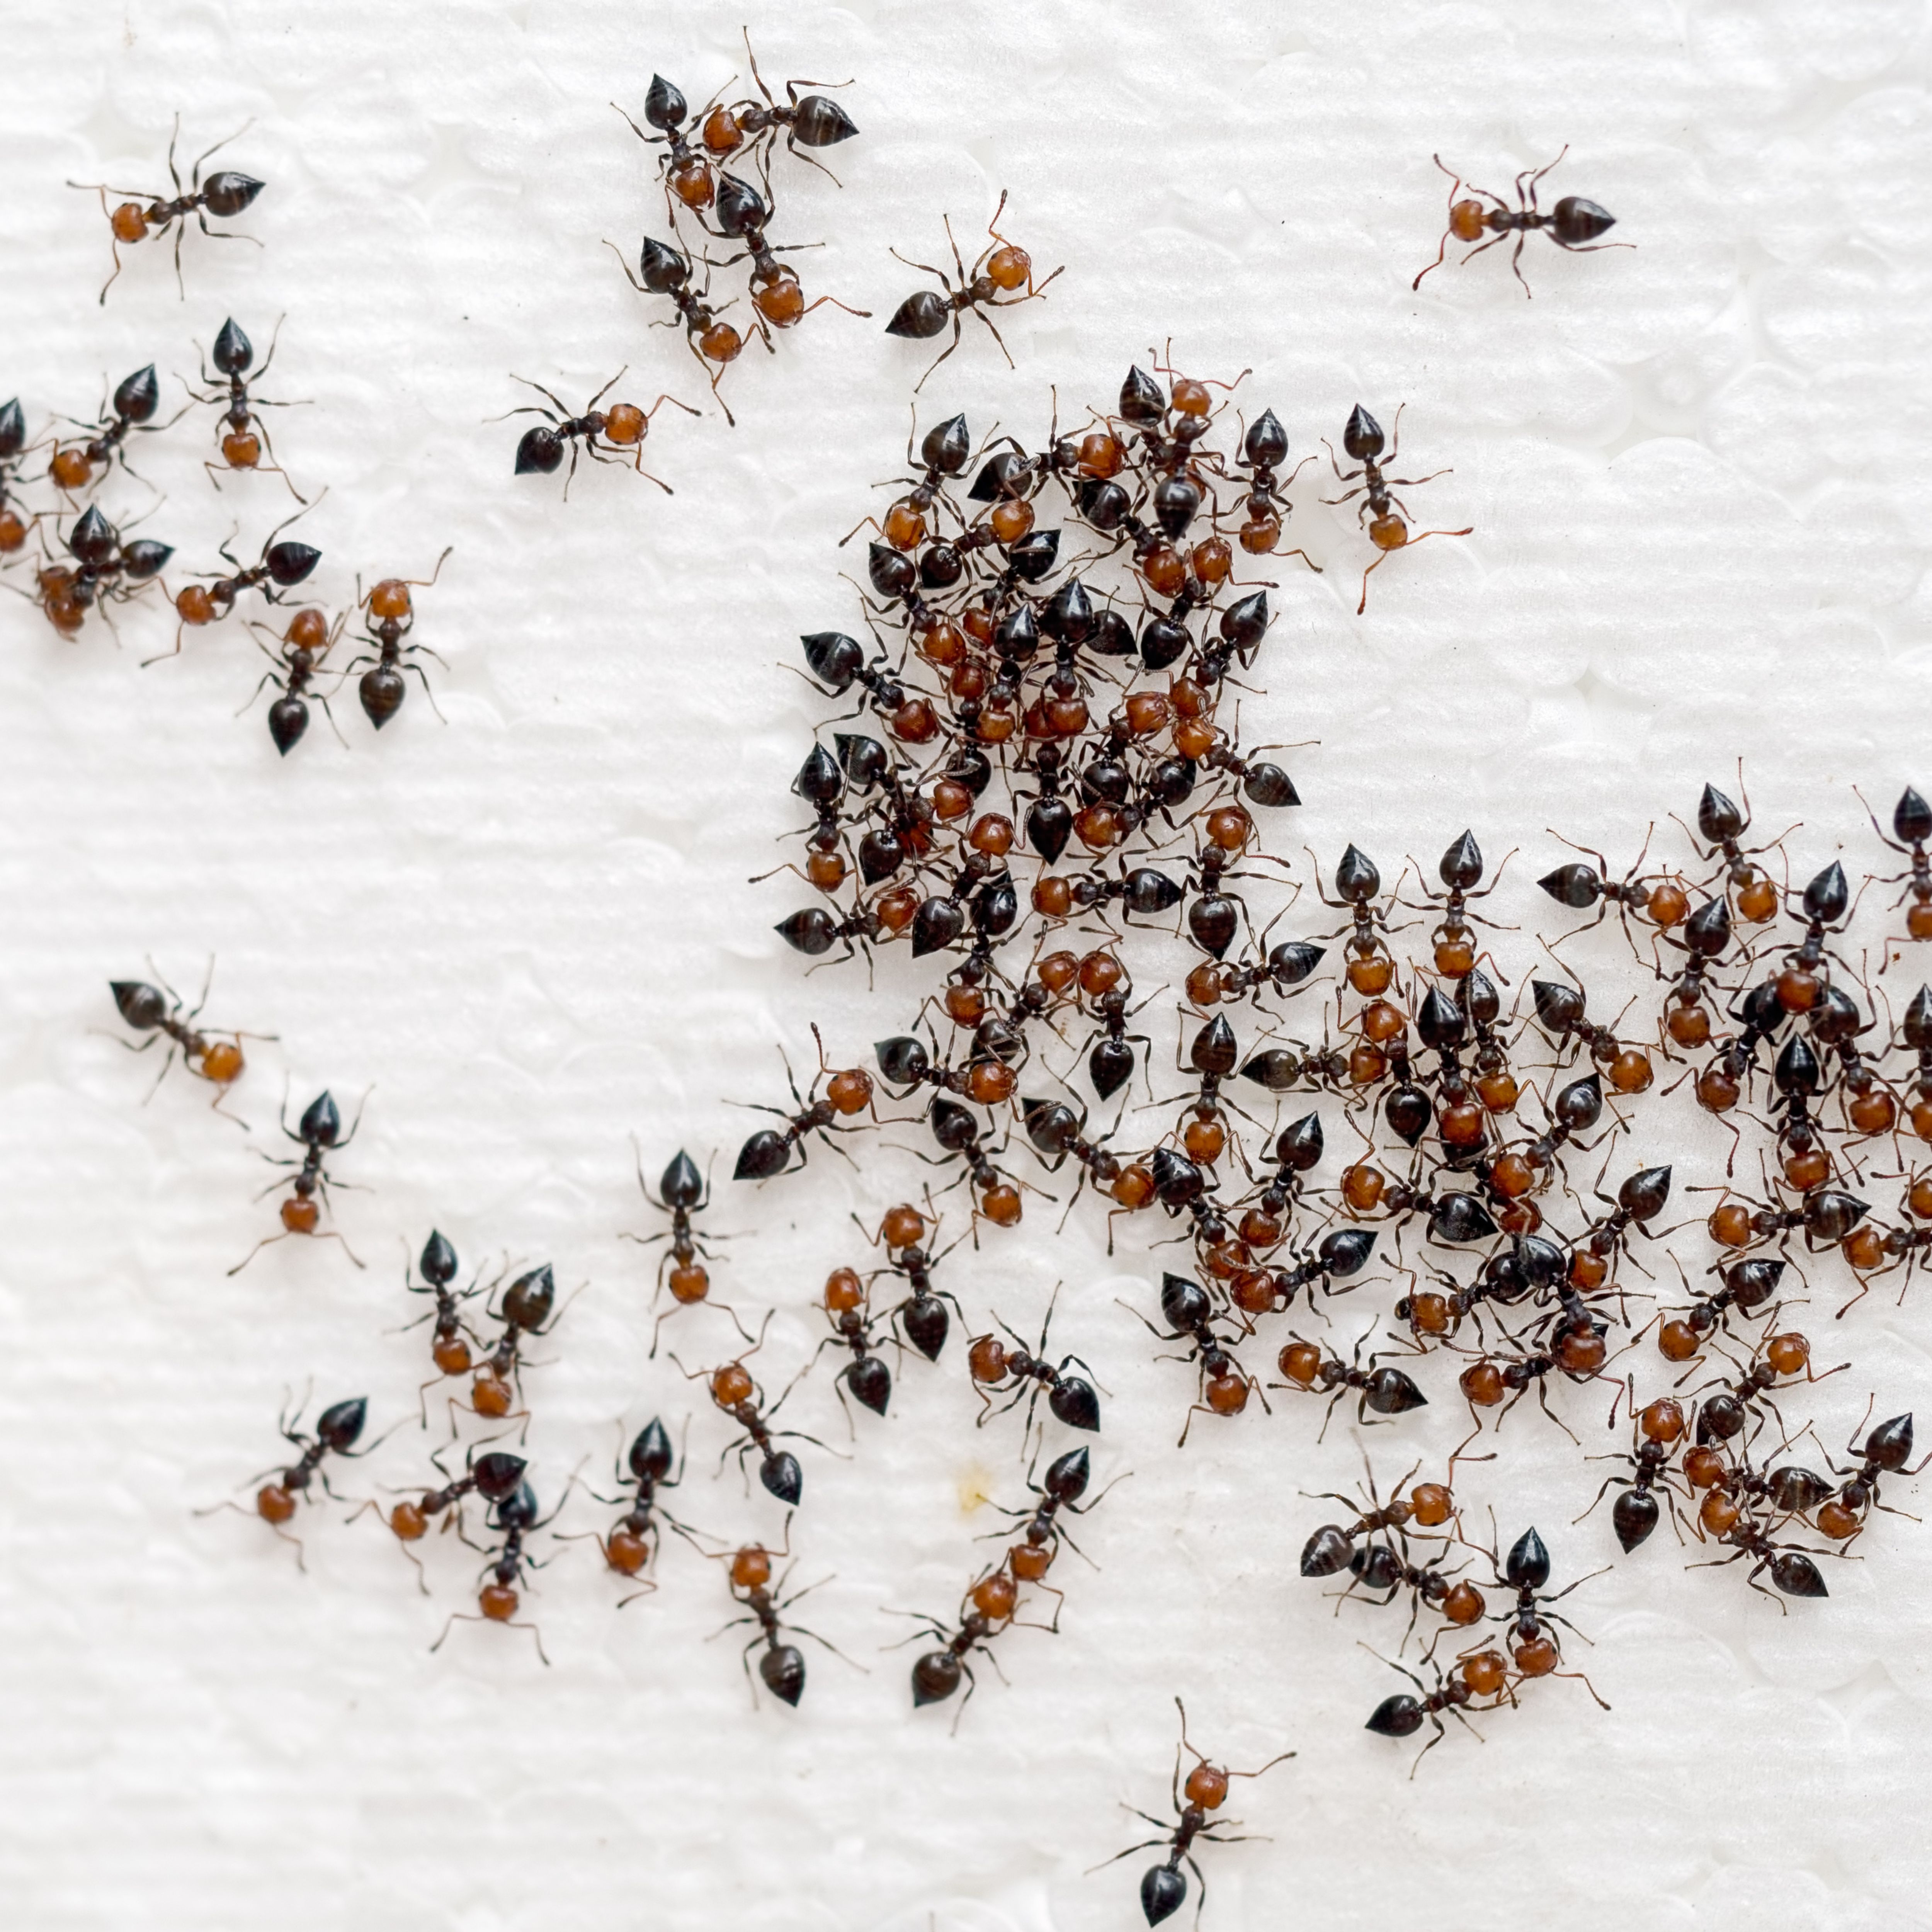 ants on a piece of white paper towel